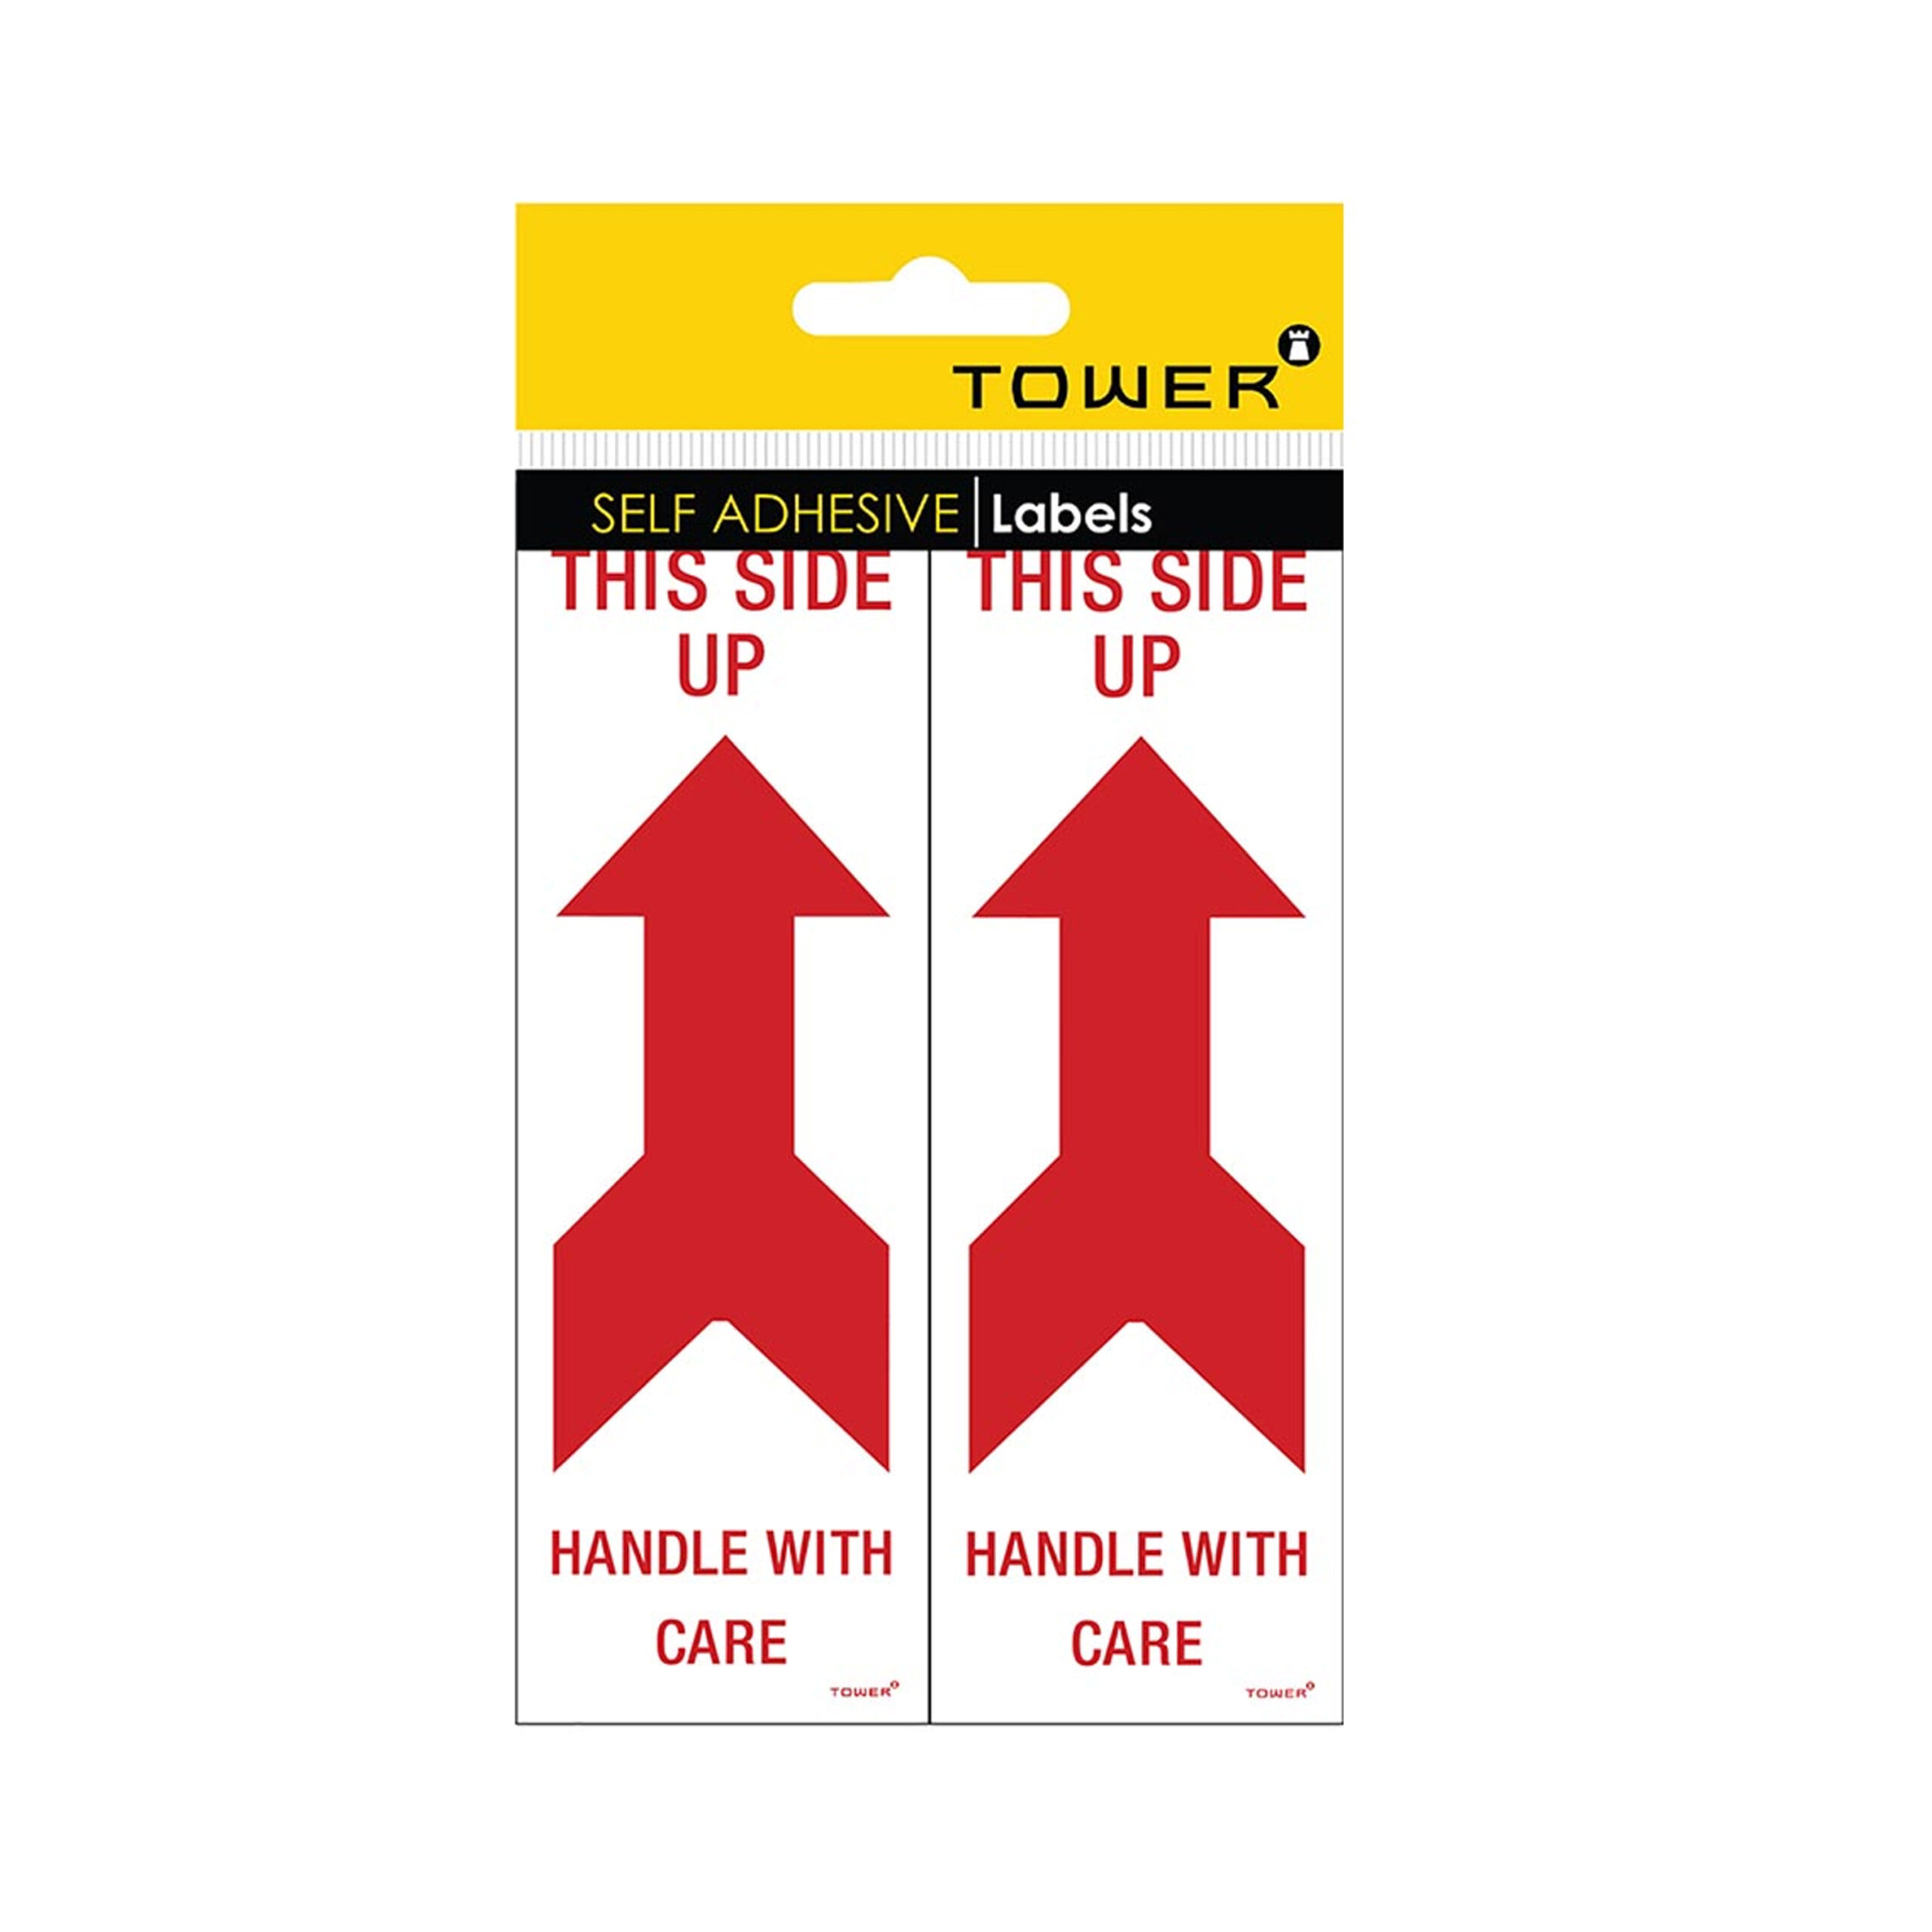 TOWER "THIS SIDE
UP" SELF
ADHESIVE LABELS
55x162mm(30
LABELS